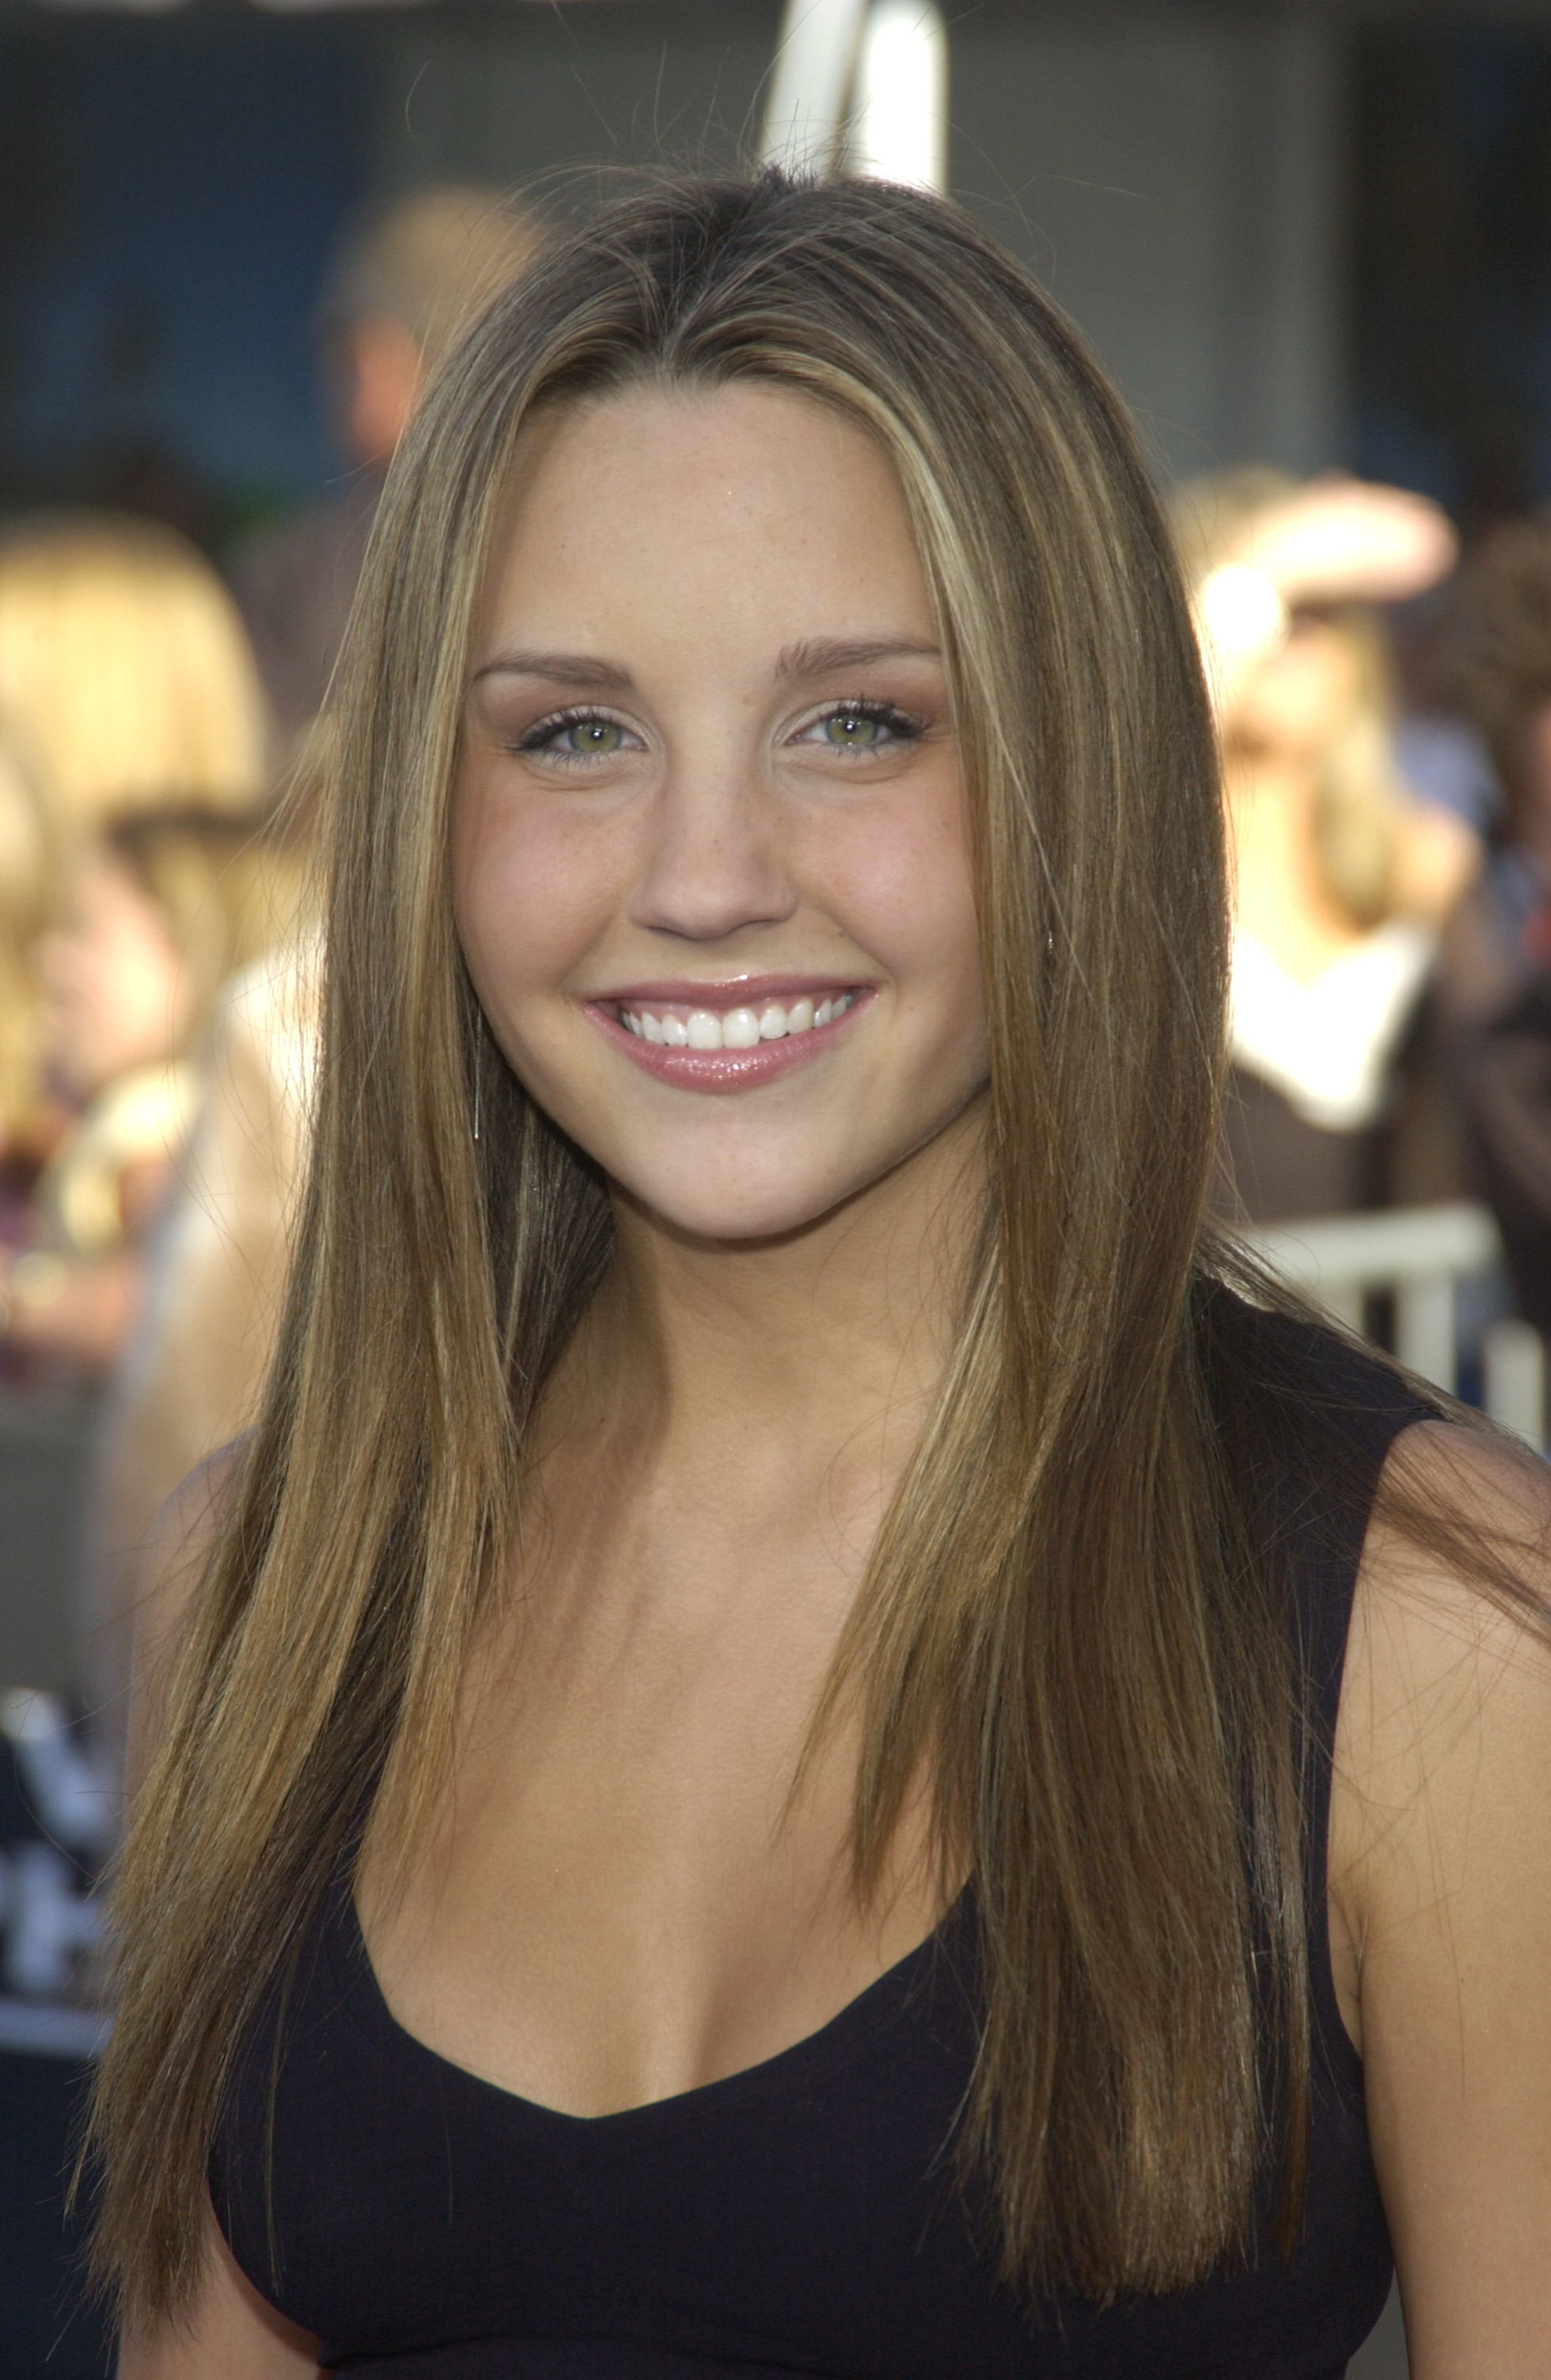 Amanda Bynes  at the Teen Choice Awards in Hollywood on August 2, 2003. | Source: Shutterstock